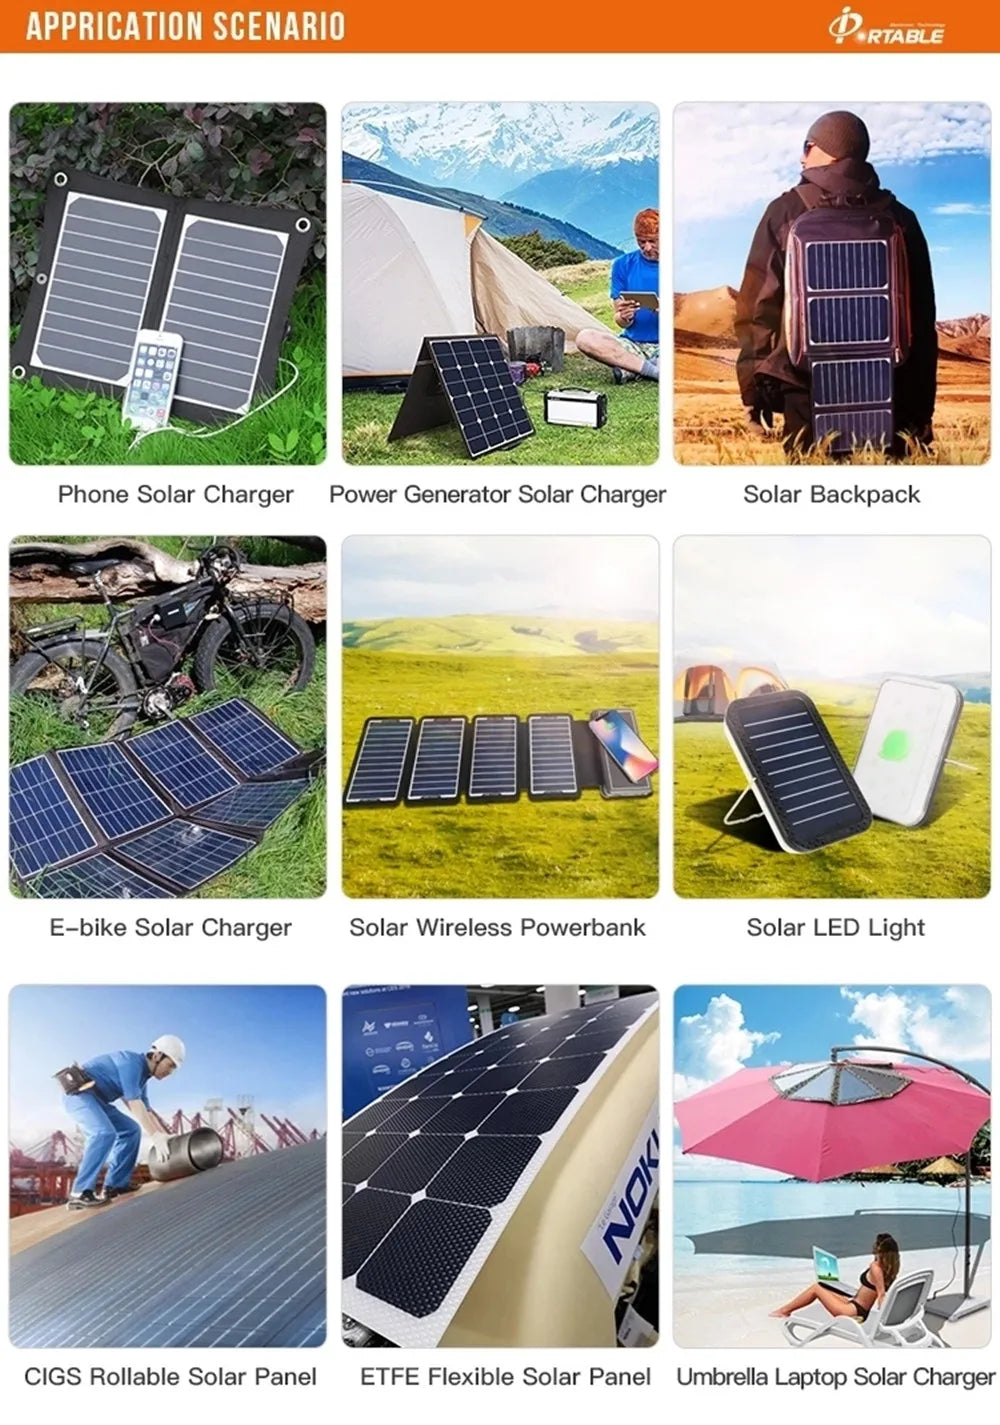 Reliable renewable energy solution for outdoor enthusiasts and adventurers.